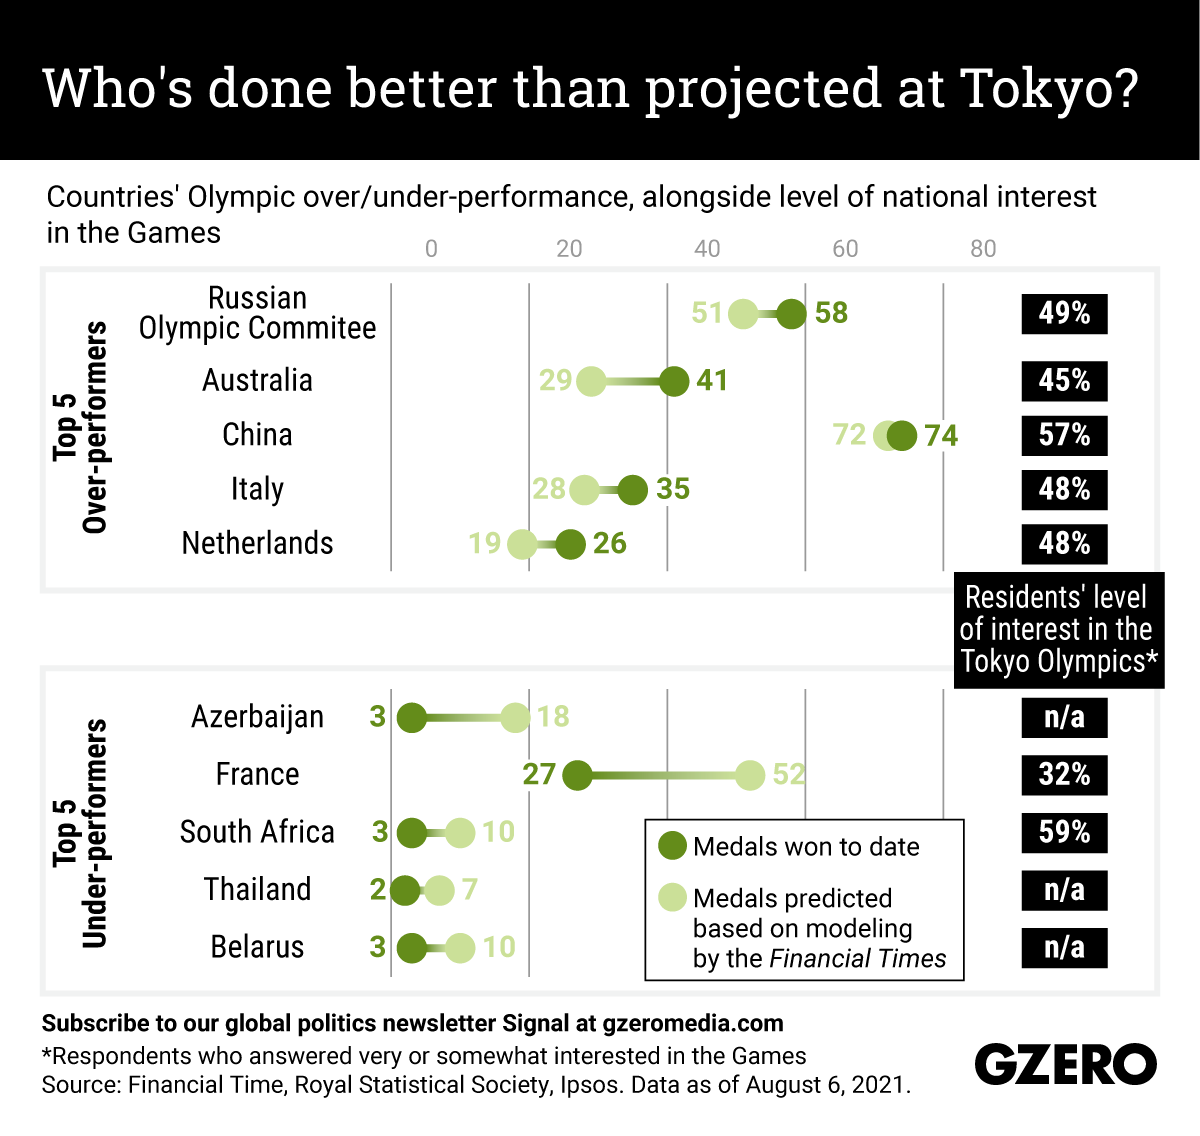 The Graphic Truth: Who's done better than projected at Tokyo?